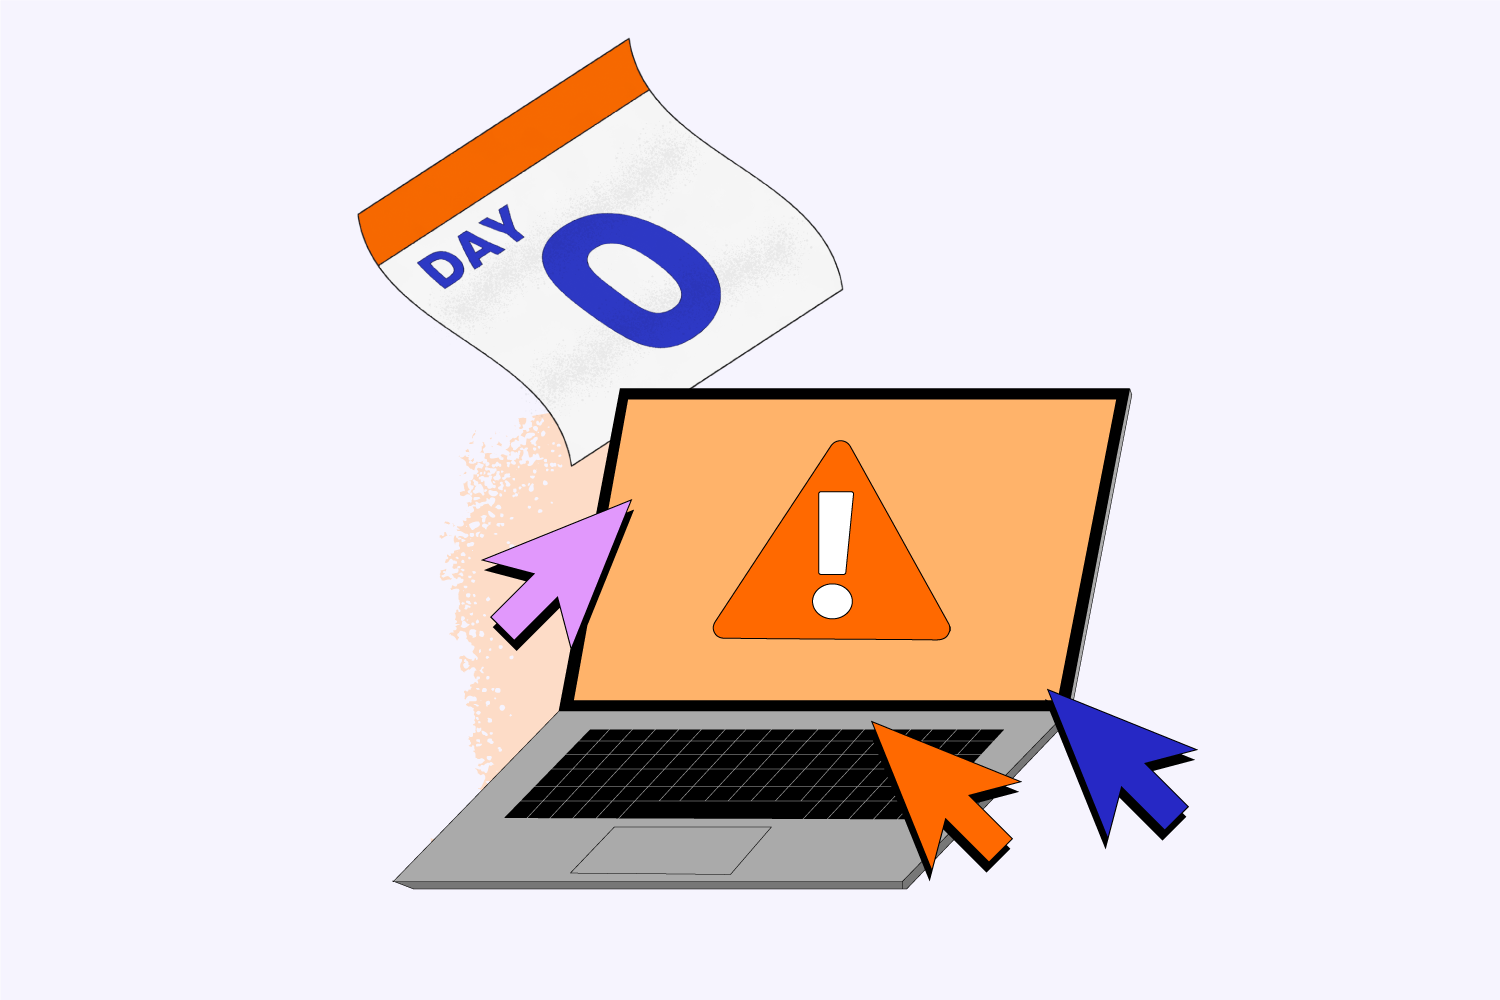 Calendar with "Day 0" next to a laptop with a warning triangle and ! mark with a couple mouse arrows pointing to it.